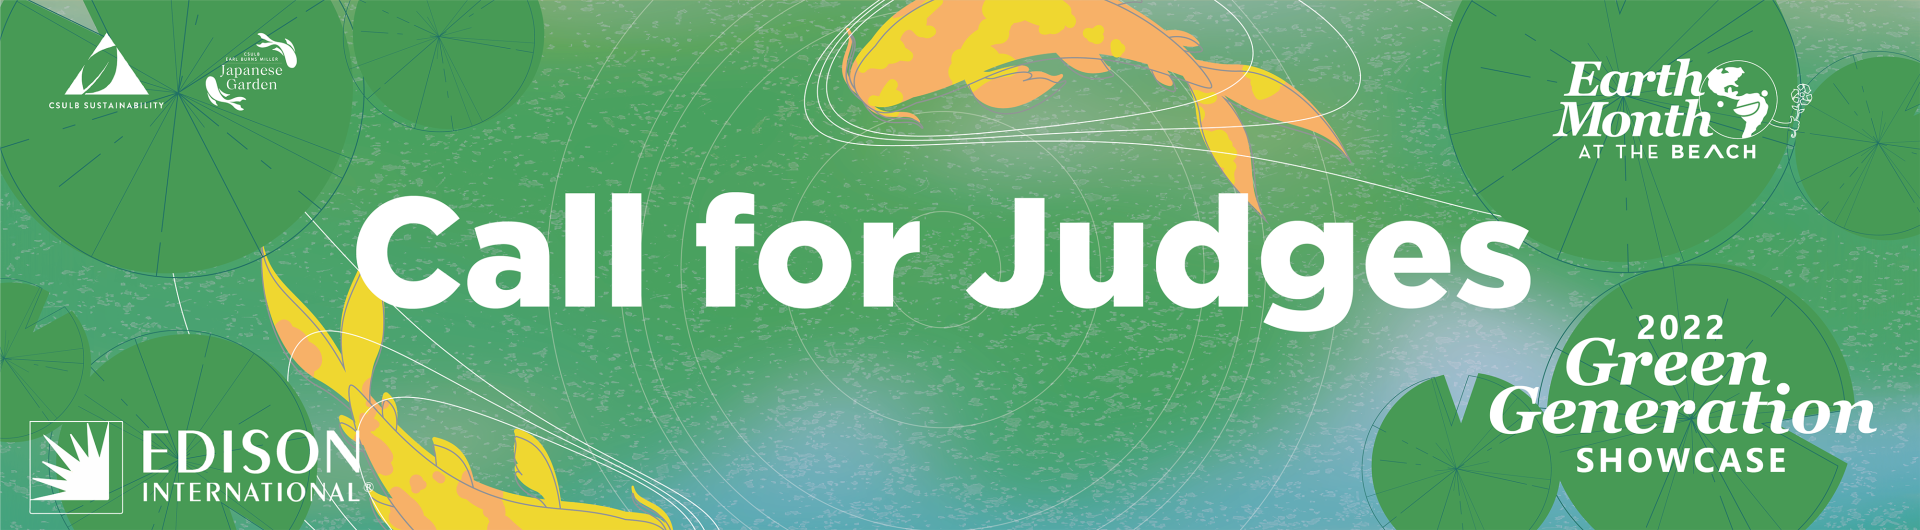 CALL FOR JUDGES